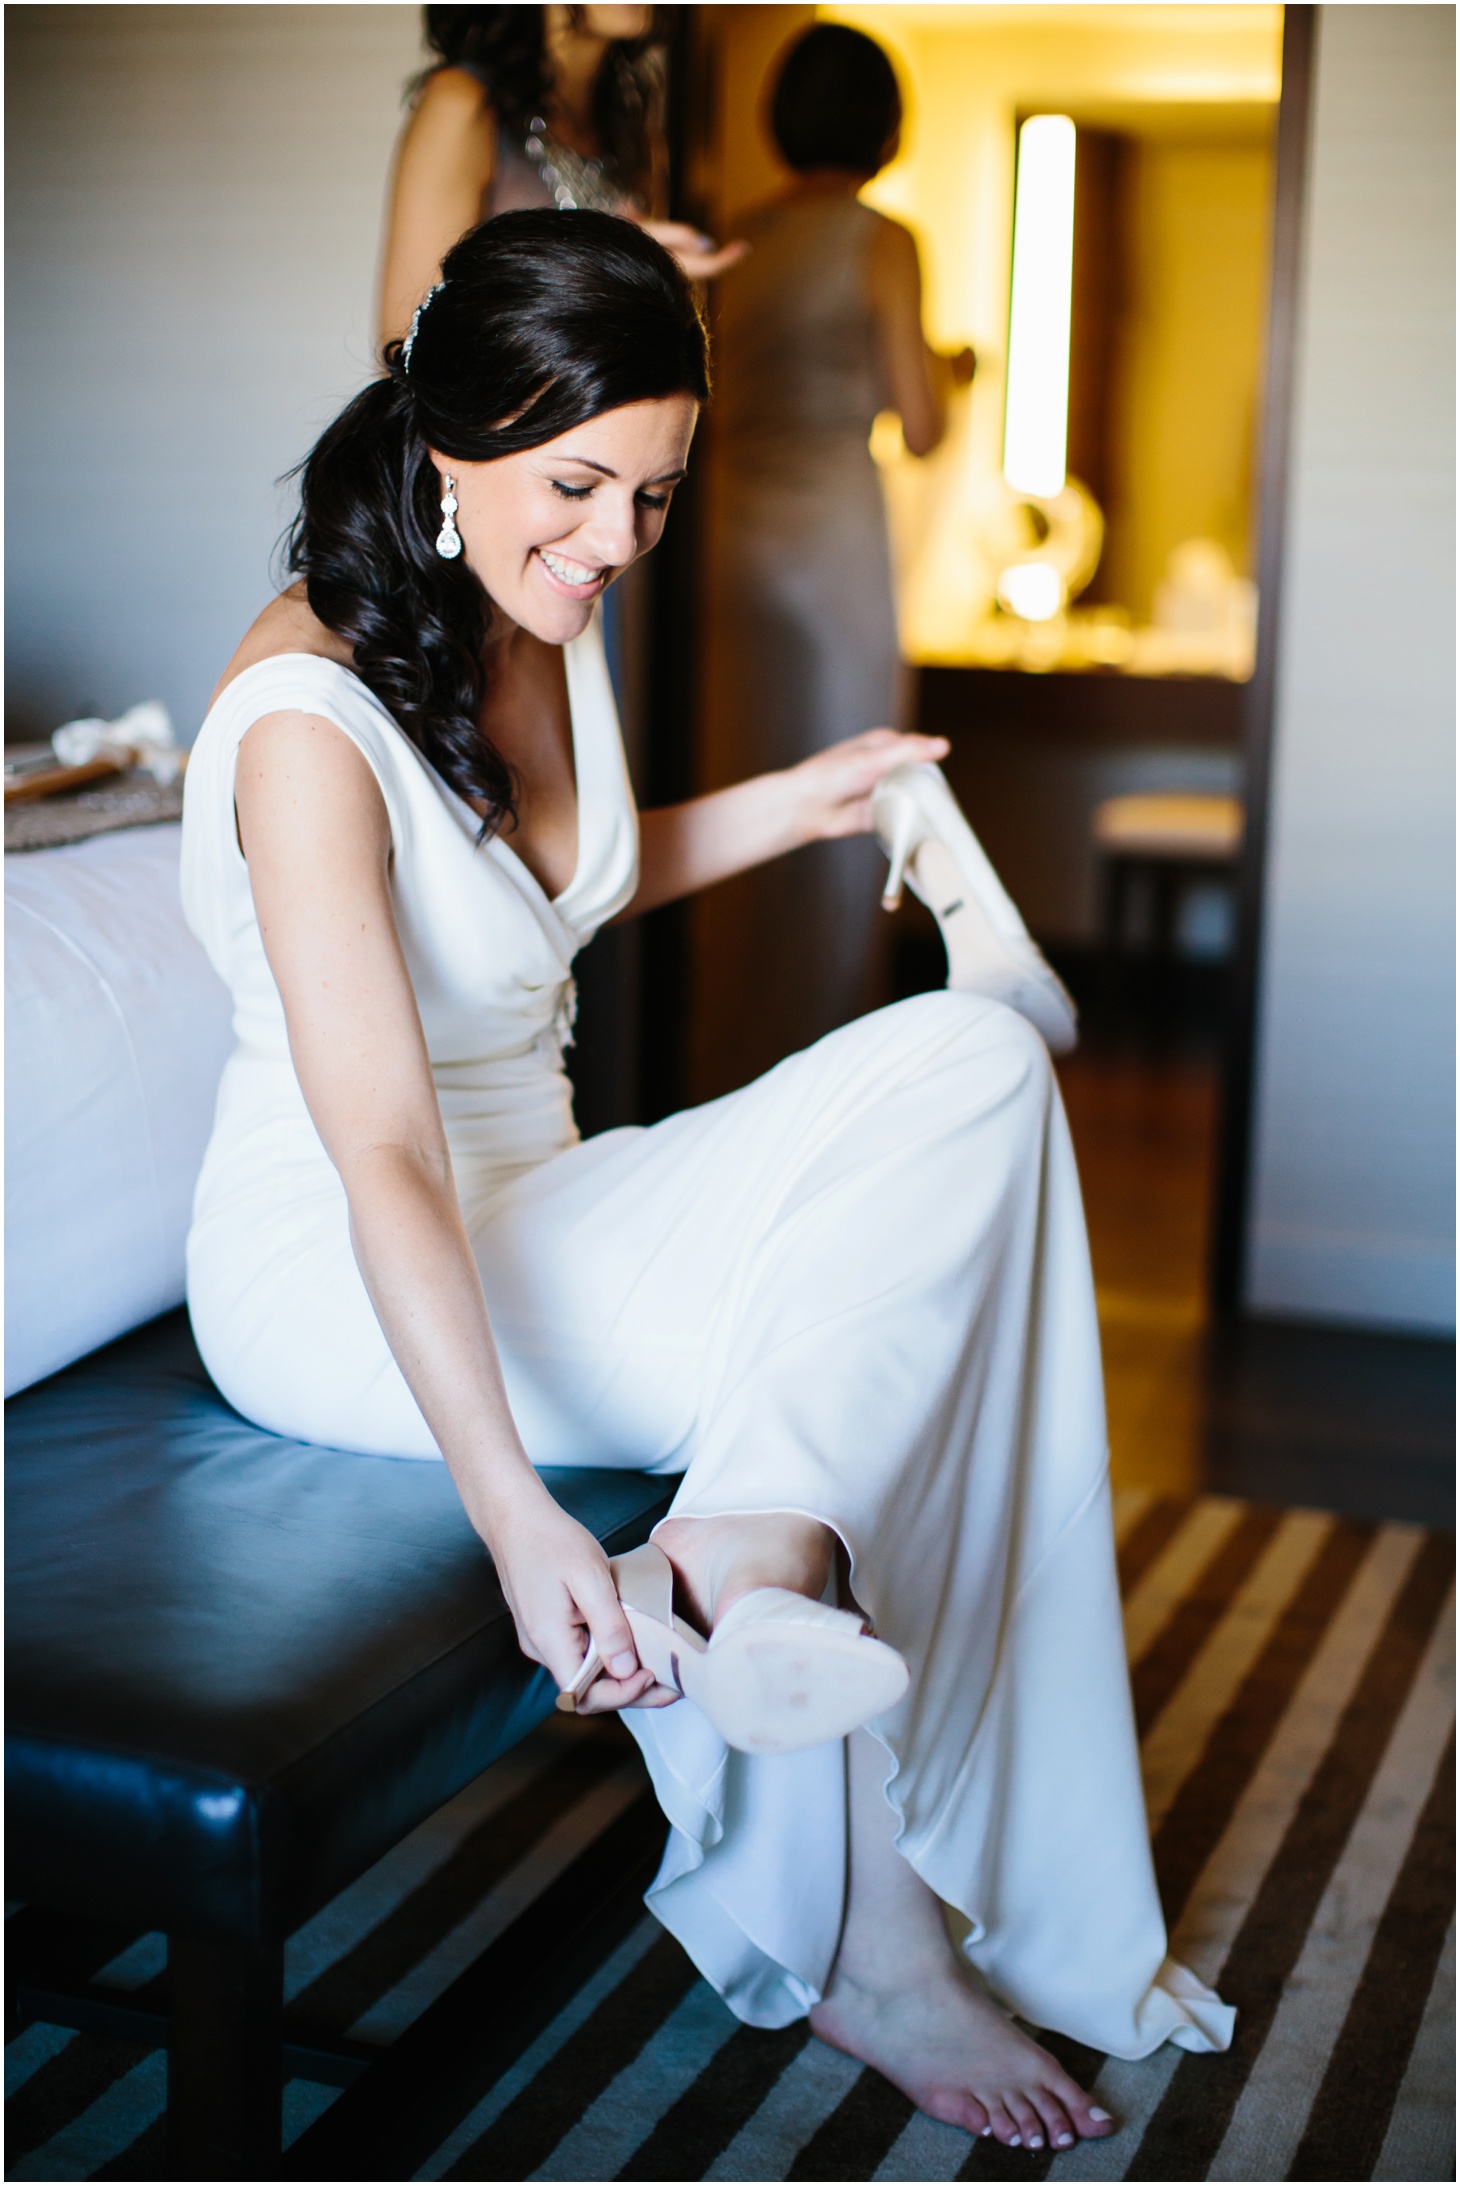 Mikey & Megan, Downtown DC Wedding at National Museum of Women in the Arts by Sarah Bradshaw Photography_0007.jpg